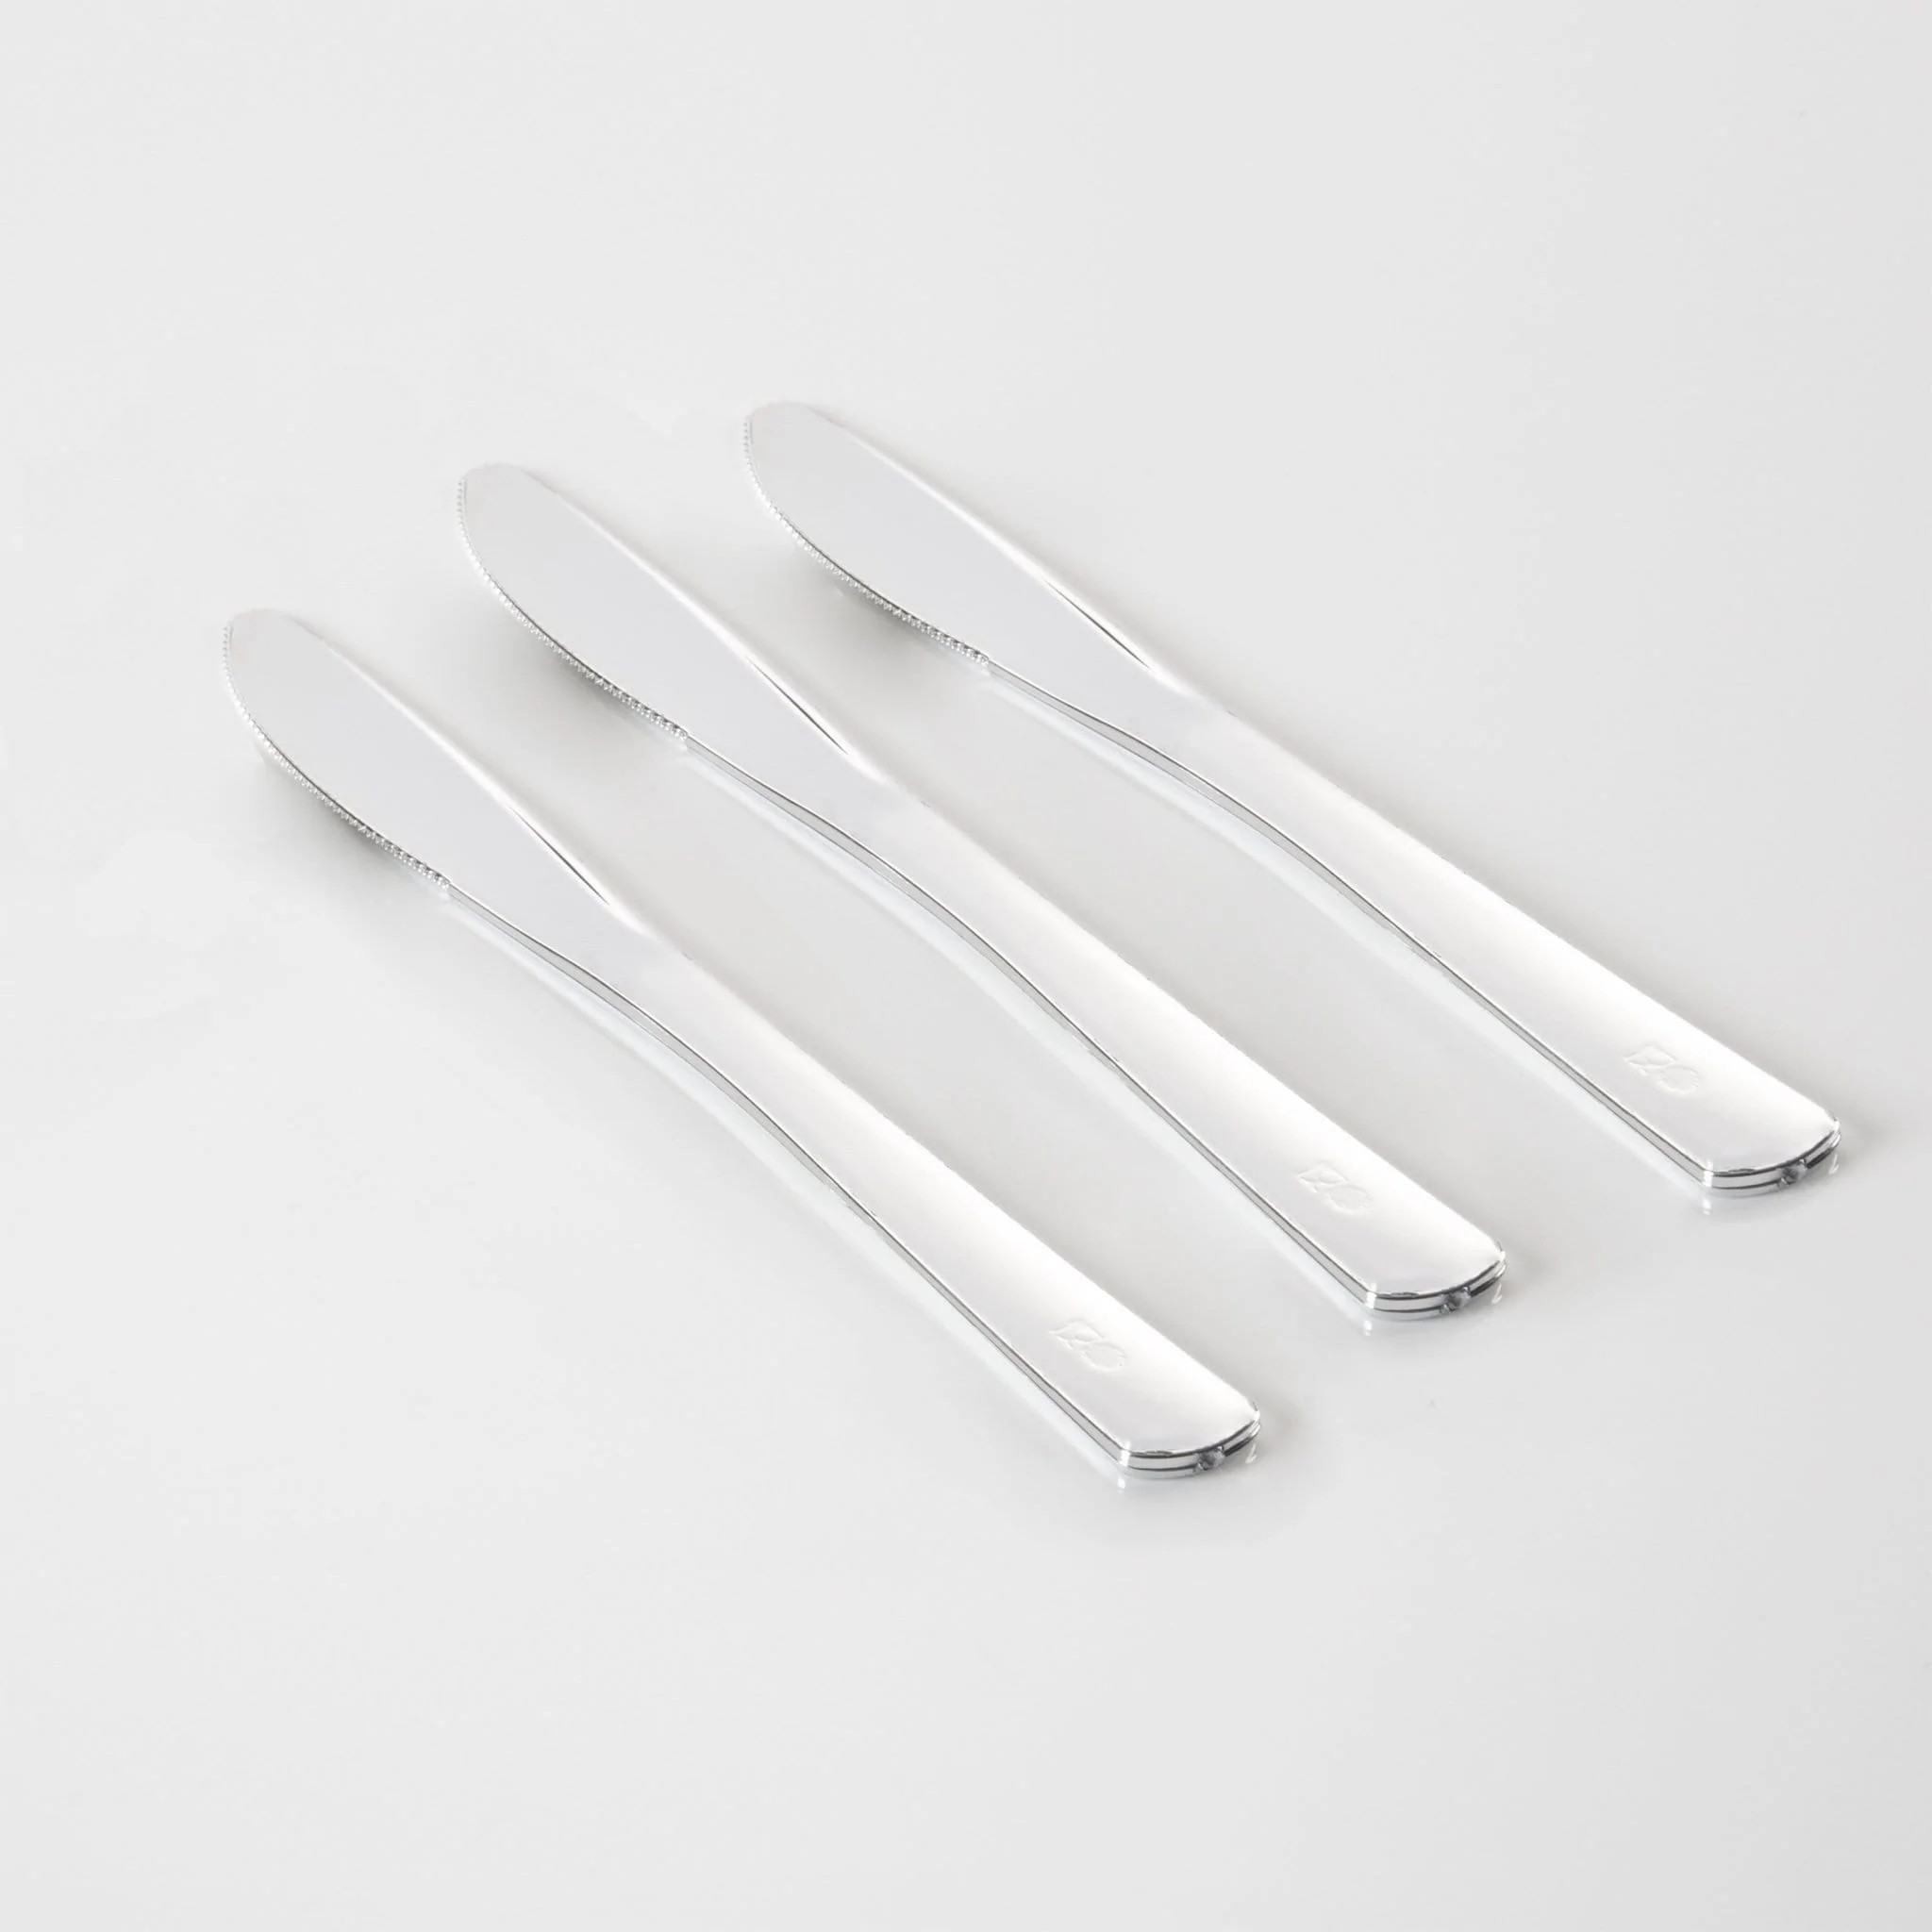 Luxe Party Classic Design Silver Plastic Knives - 20 pcs